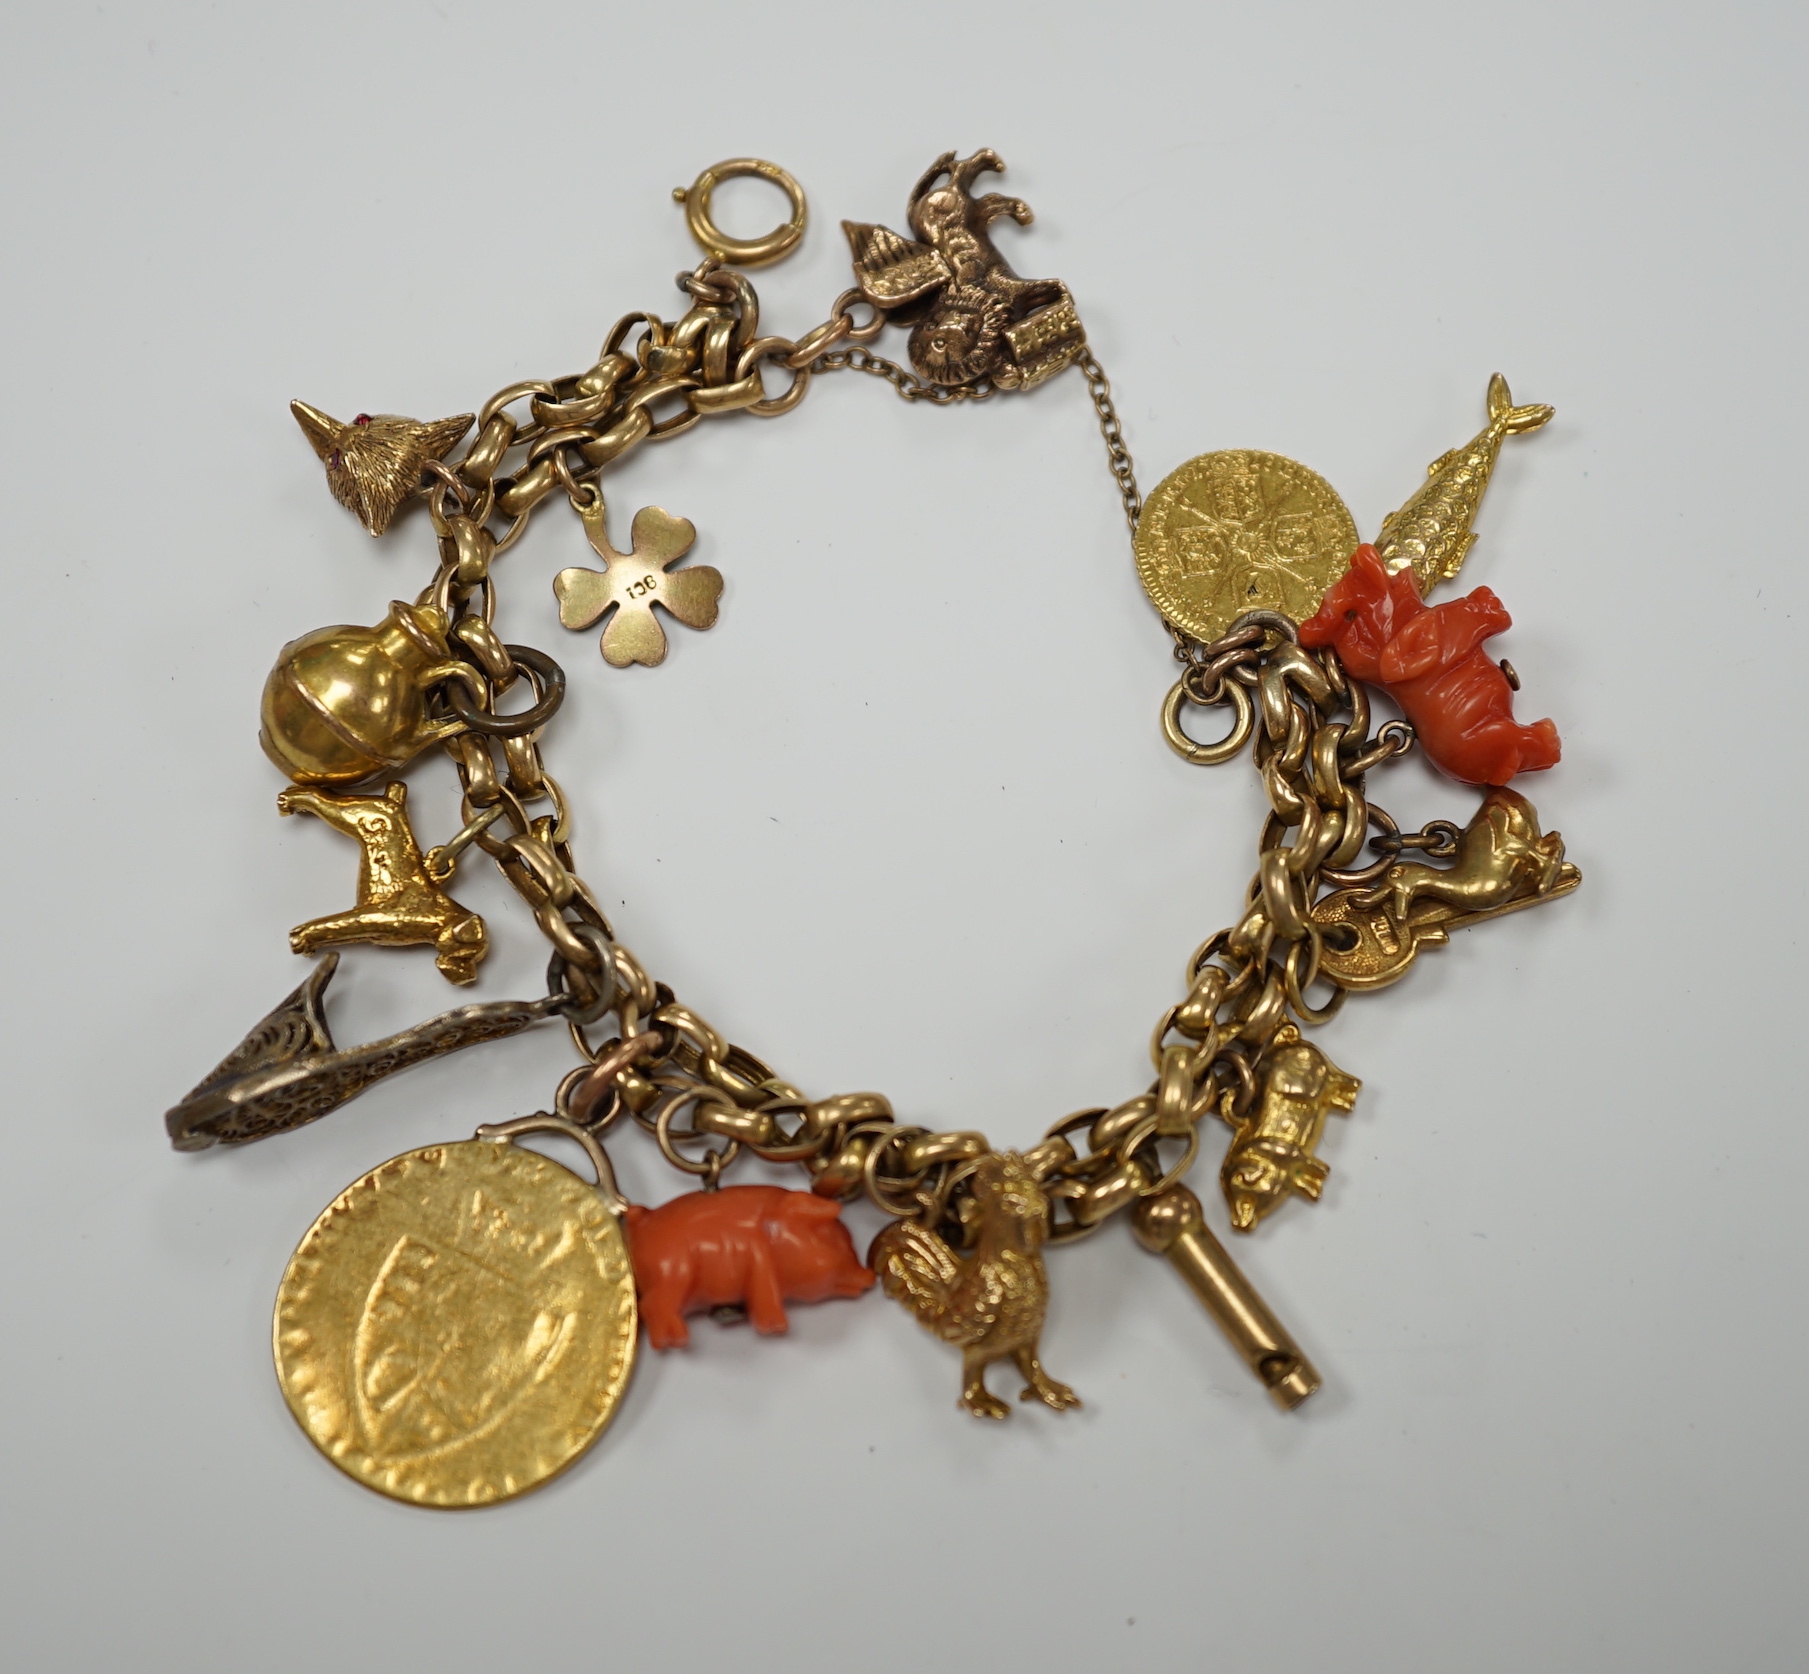 An early 20th century 9ct multi link charm bracelet, hung with sixteen assorted charms, including 9ct, coral, enamelled and a worn spade guinea